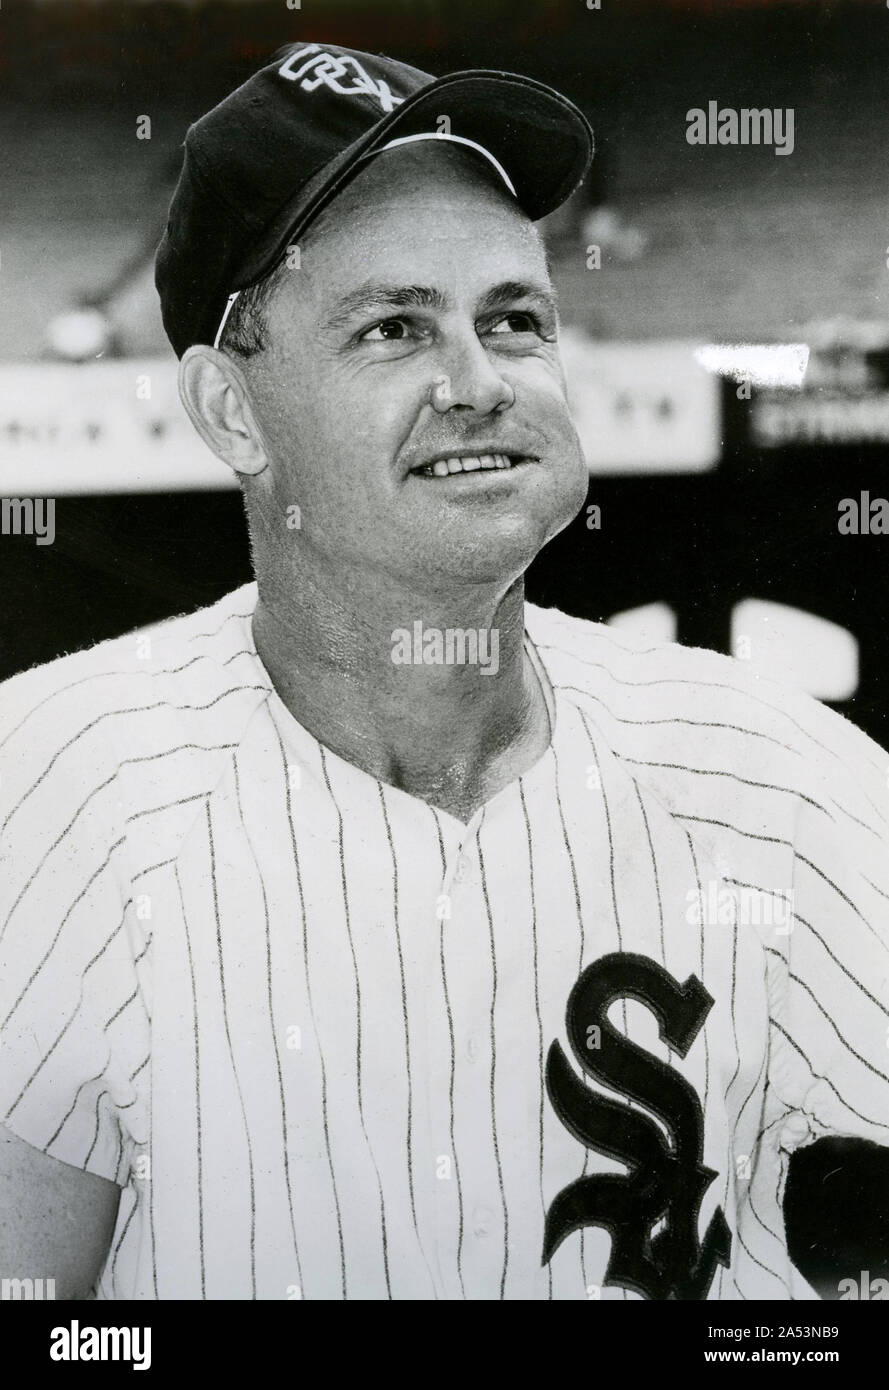 AWESOME NELLIE FOX WHITE SOX GREAT PORTRAIT 8x10 